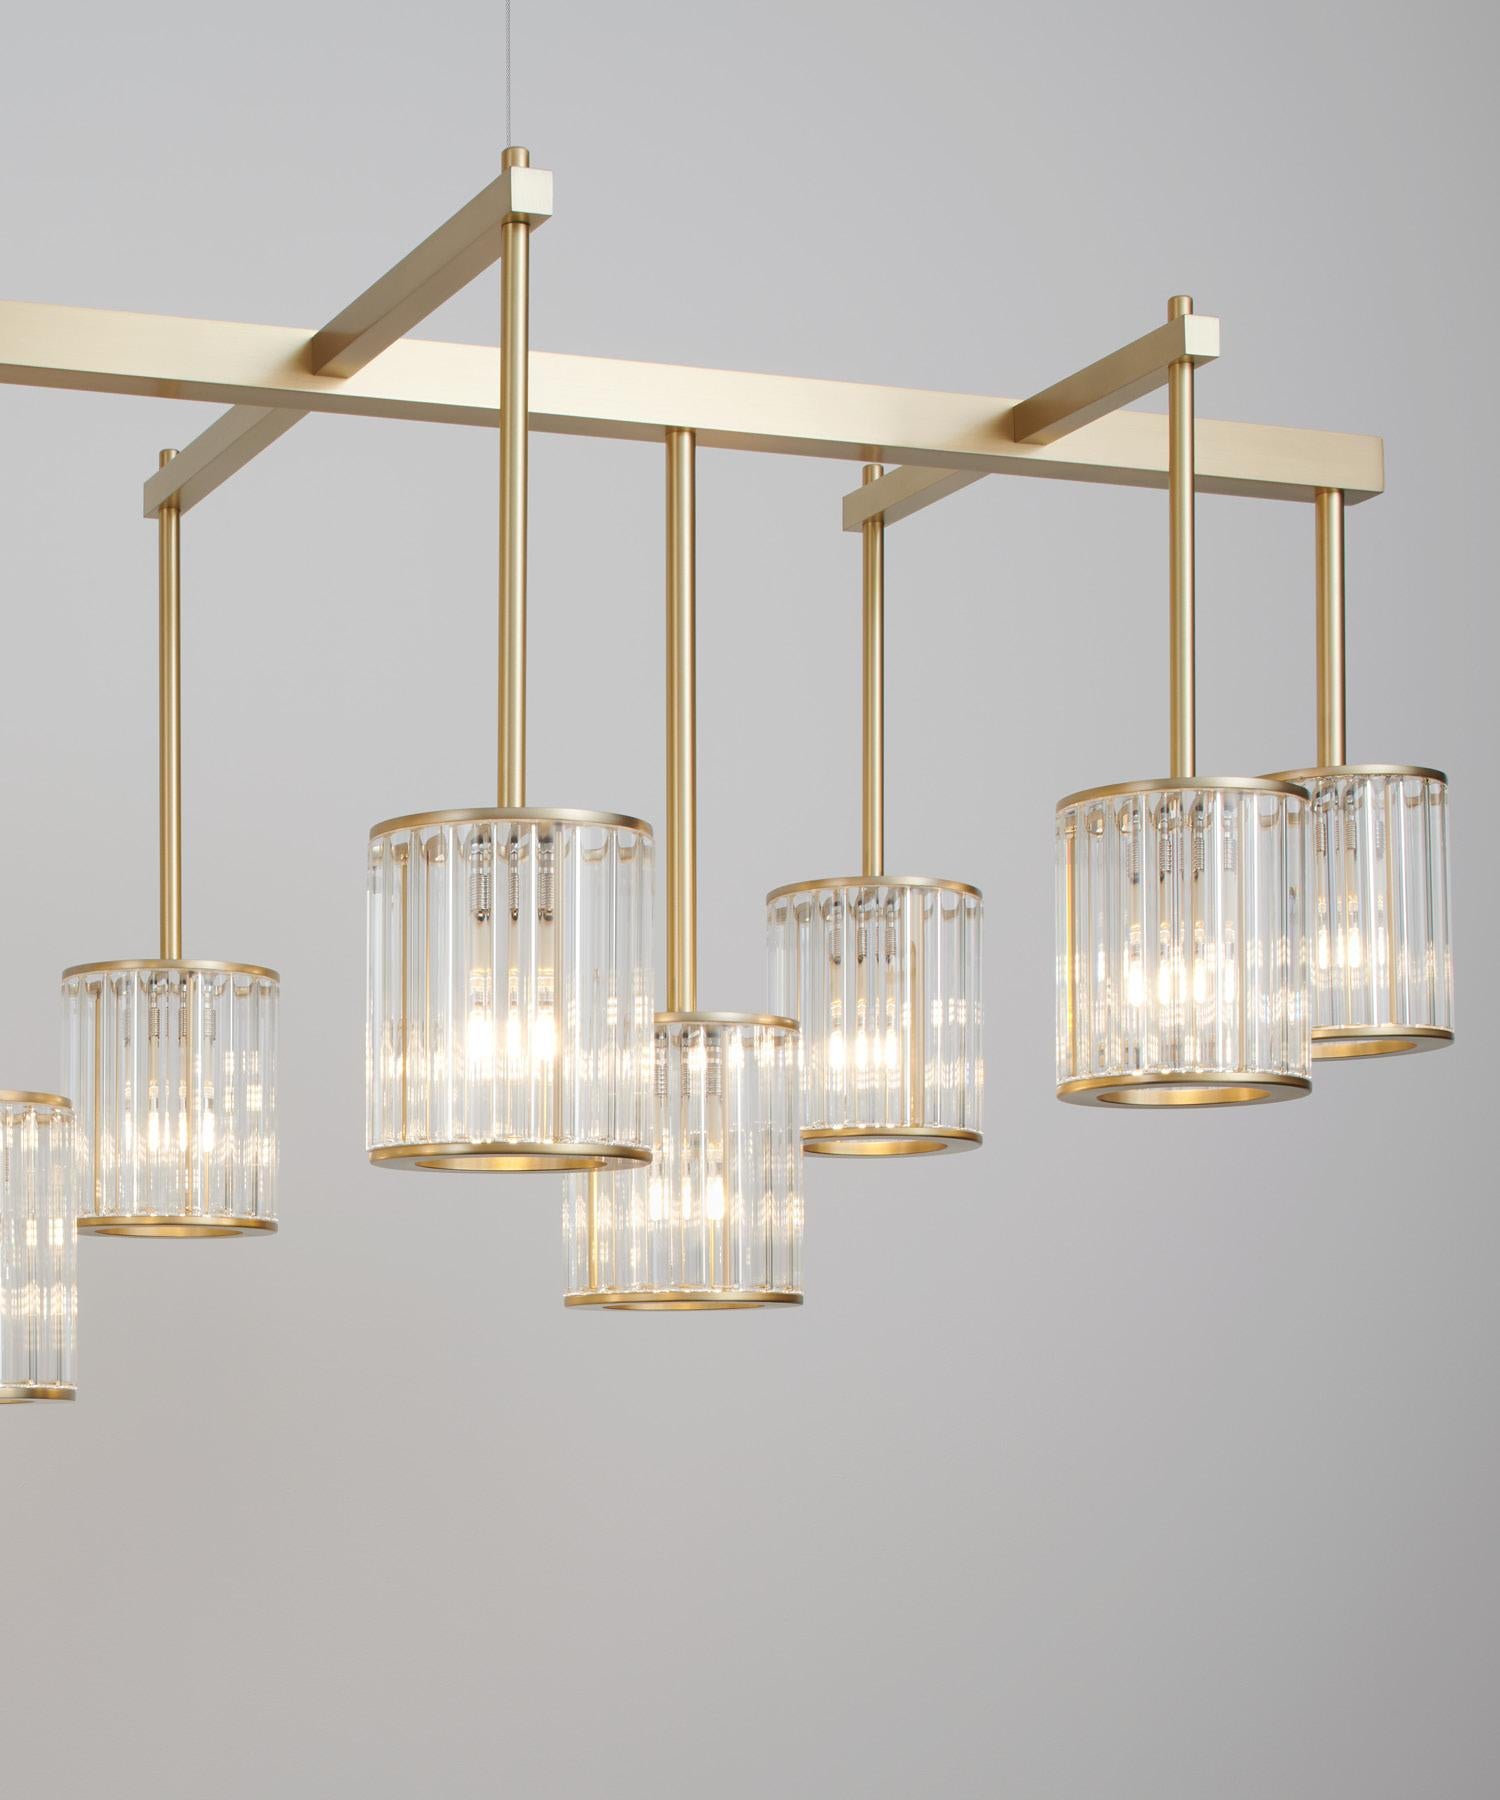 Flute Beam Chandelier with 16 Arms in Brushed Brass and Frosted Glass Diffusers For Sale 4